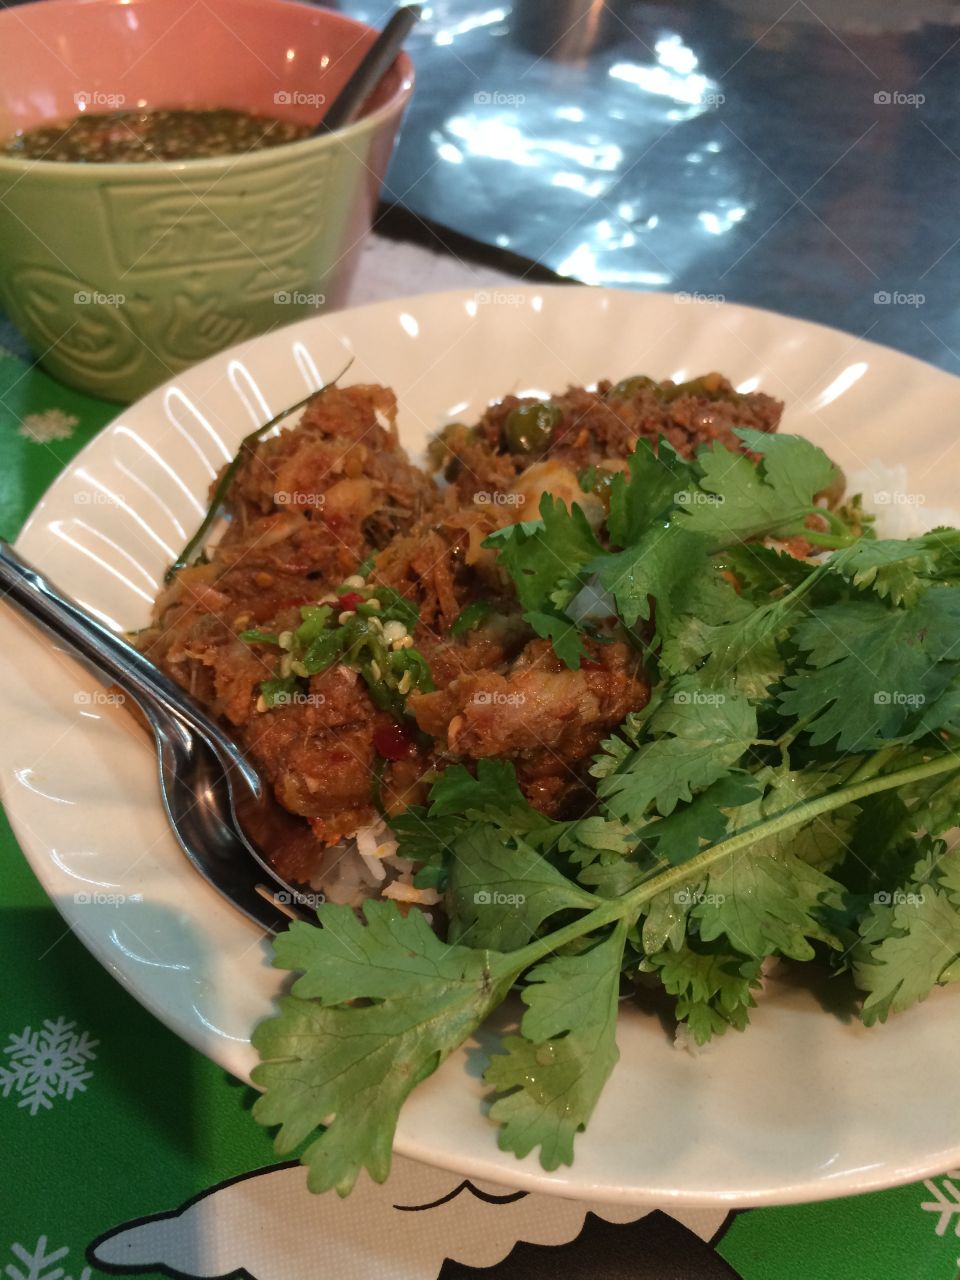 Coriander always good with spicy stir fry pork or beef and rice